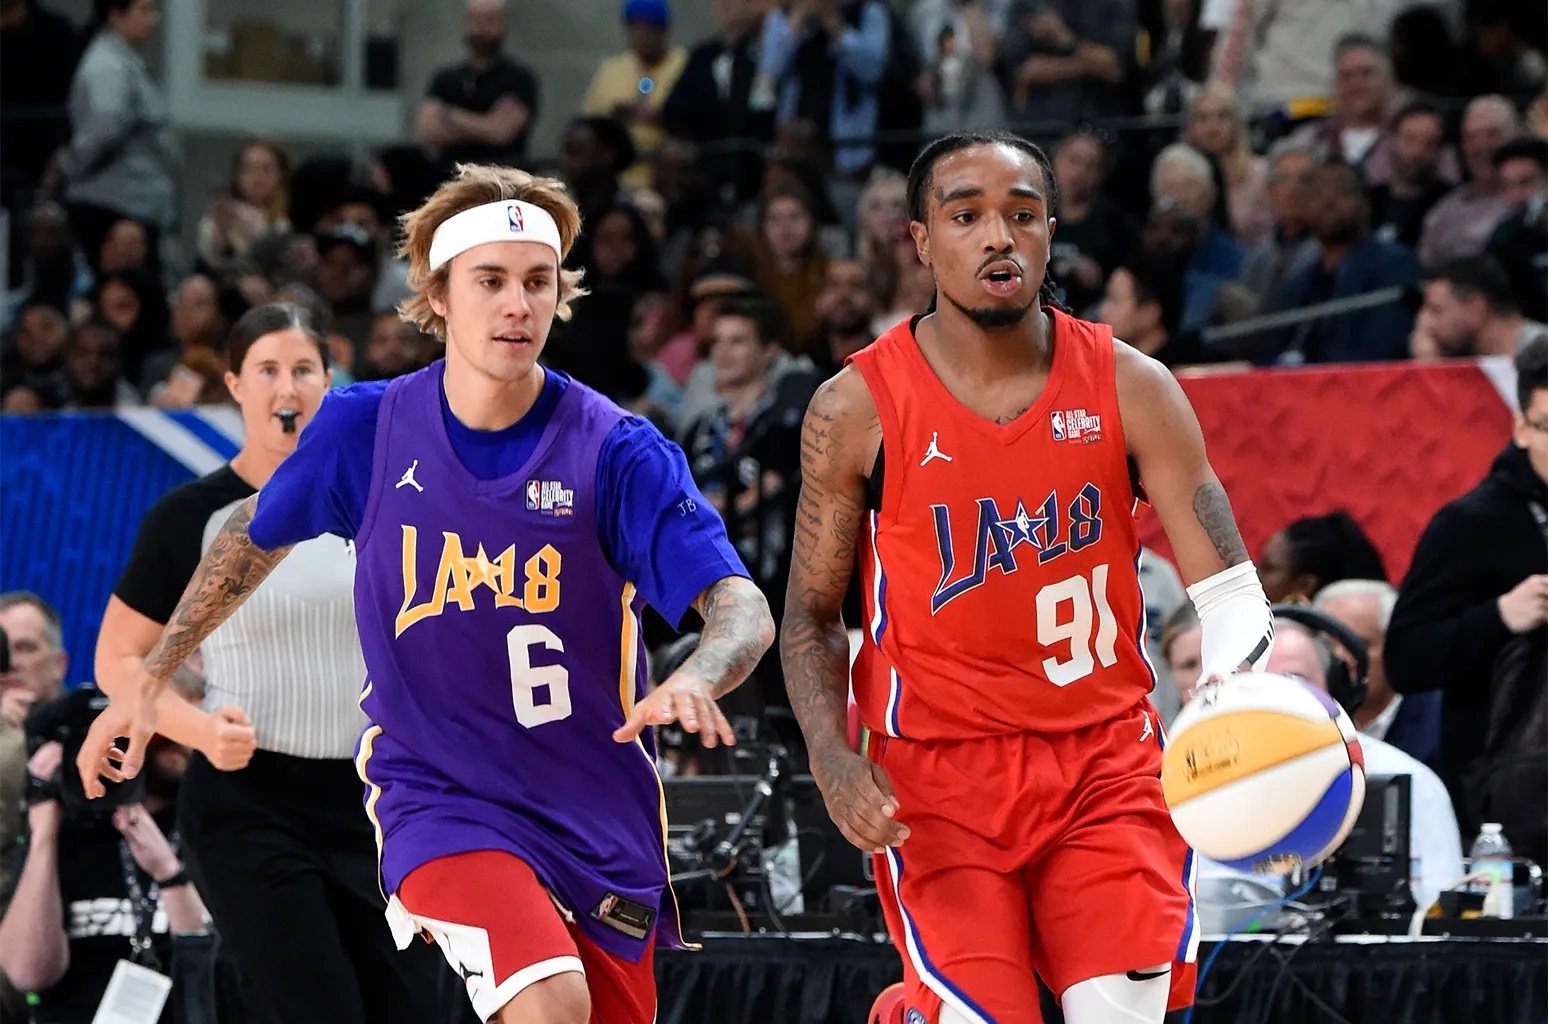 justin-bieber-impresses-with-basketball-skills-in-l-a-game